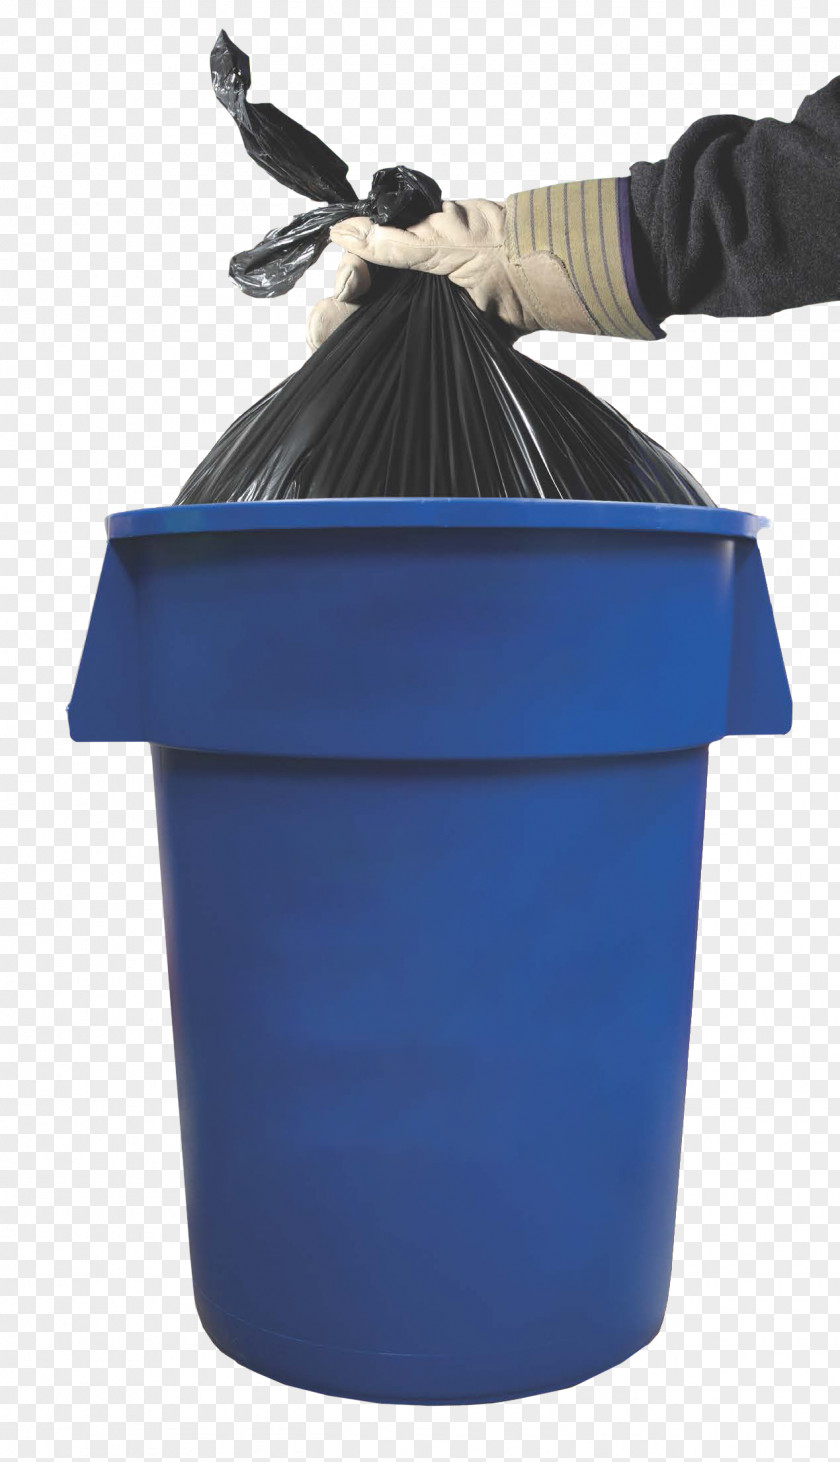 Taking Out The Trash Rubbish Bins & Waste Paper Baskets Bin Bag Stock Photography Plastic PNG